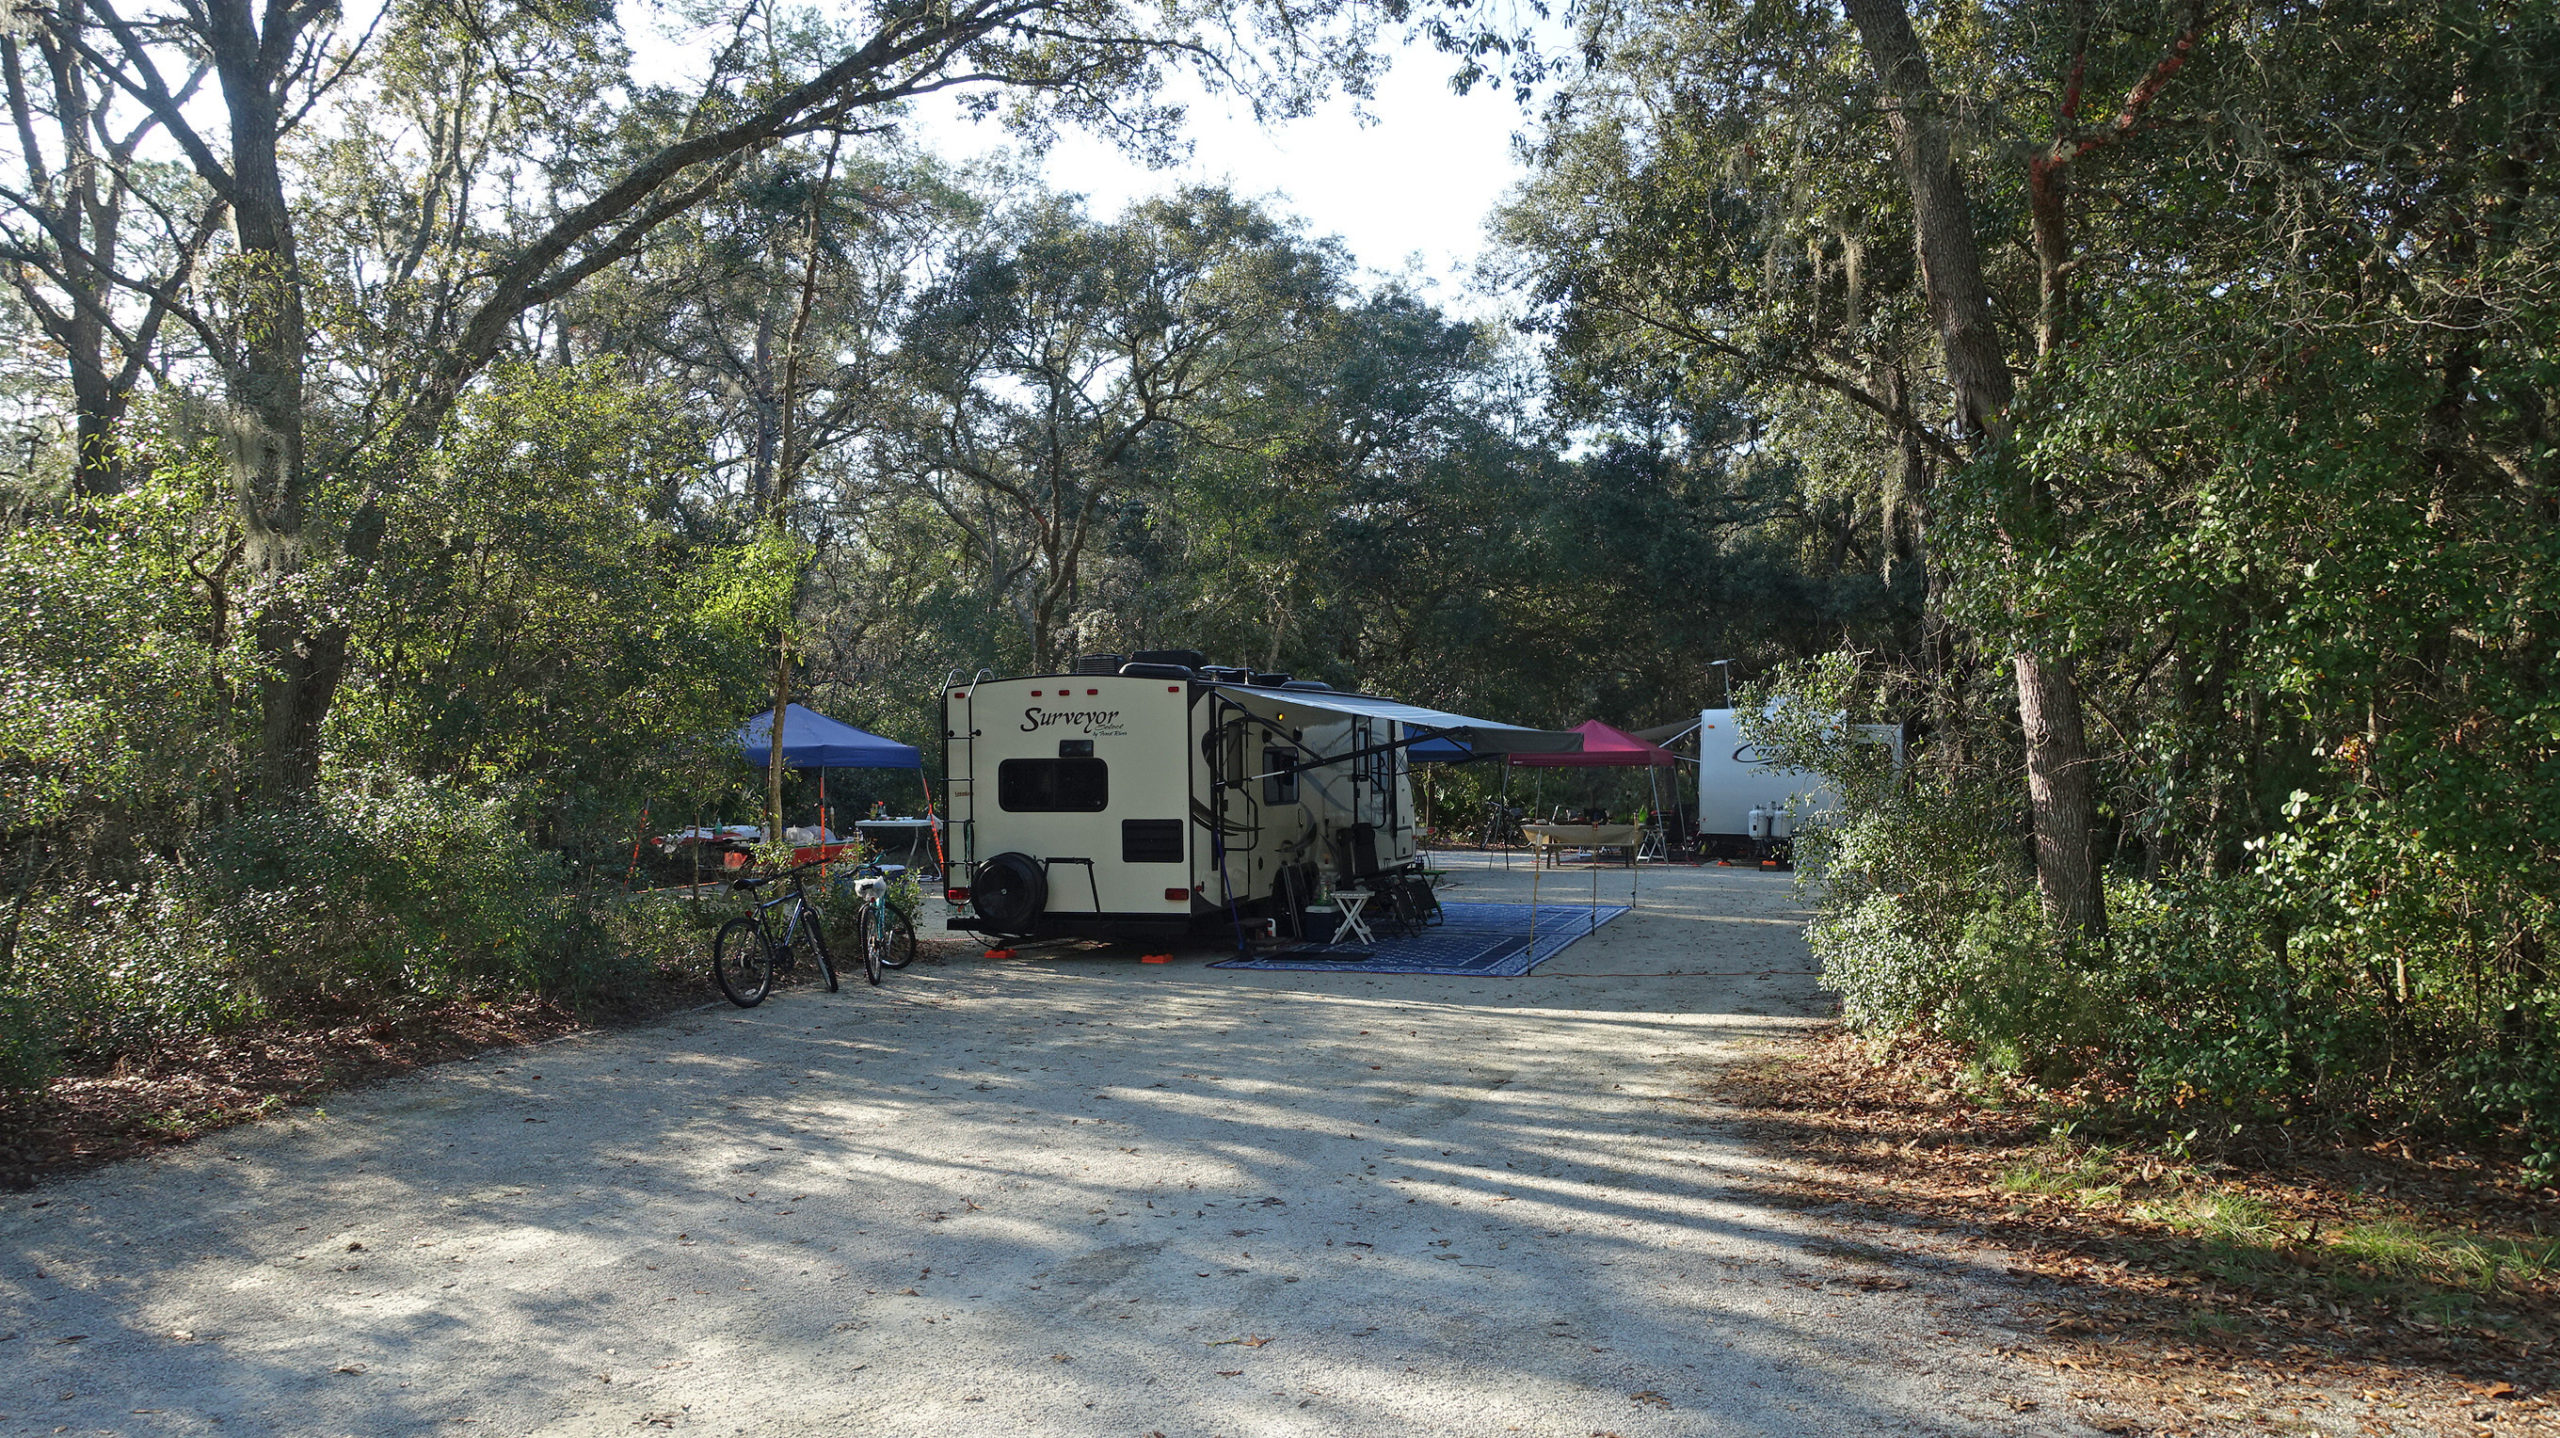 RV with awning extended parked at a state park campground